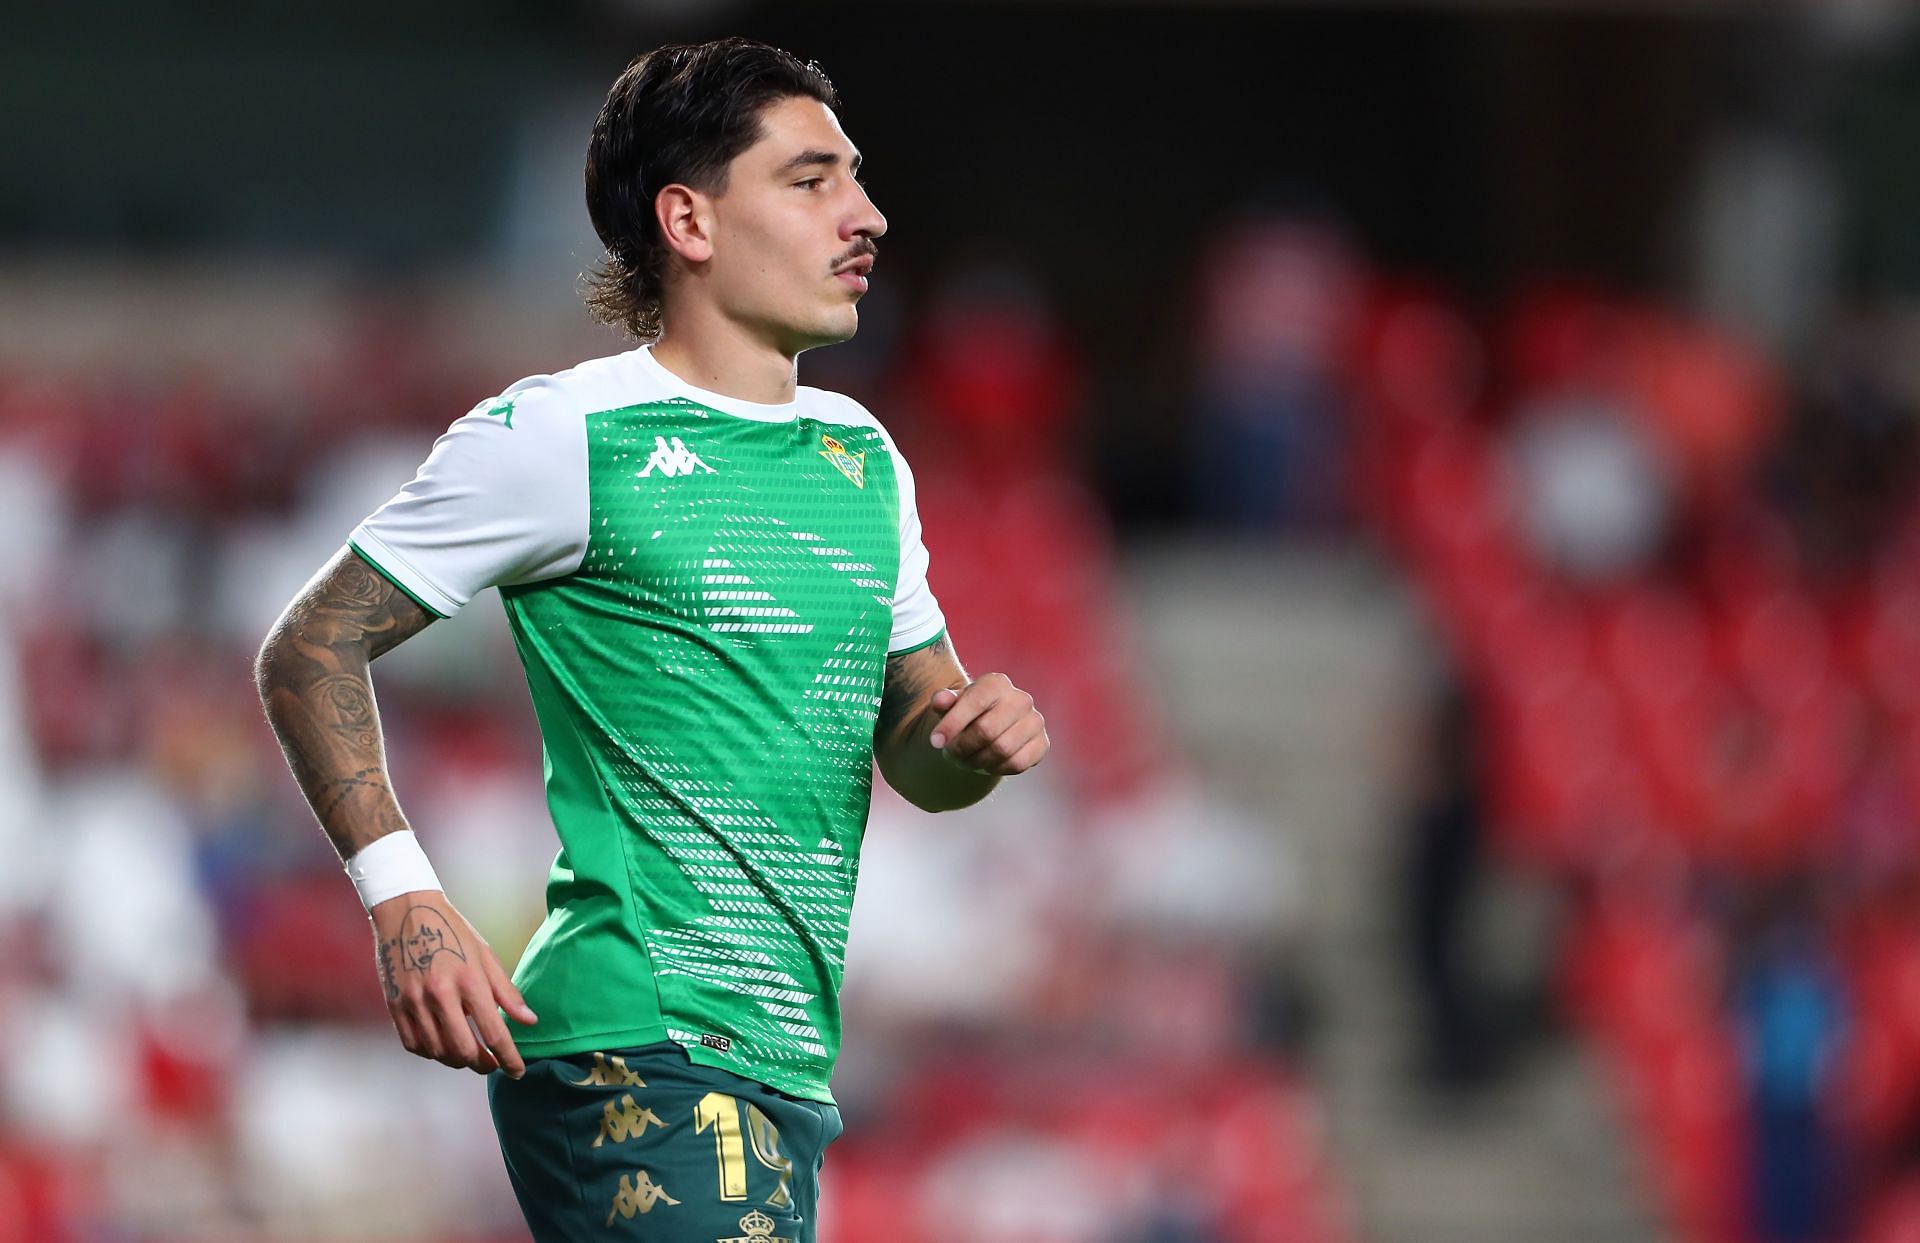 Hector Bellerin wants to extend his stay with Real Betis.